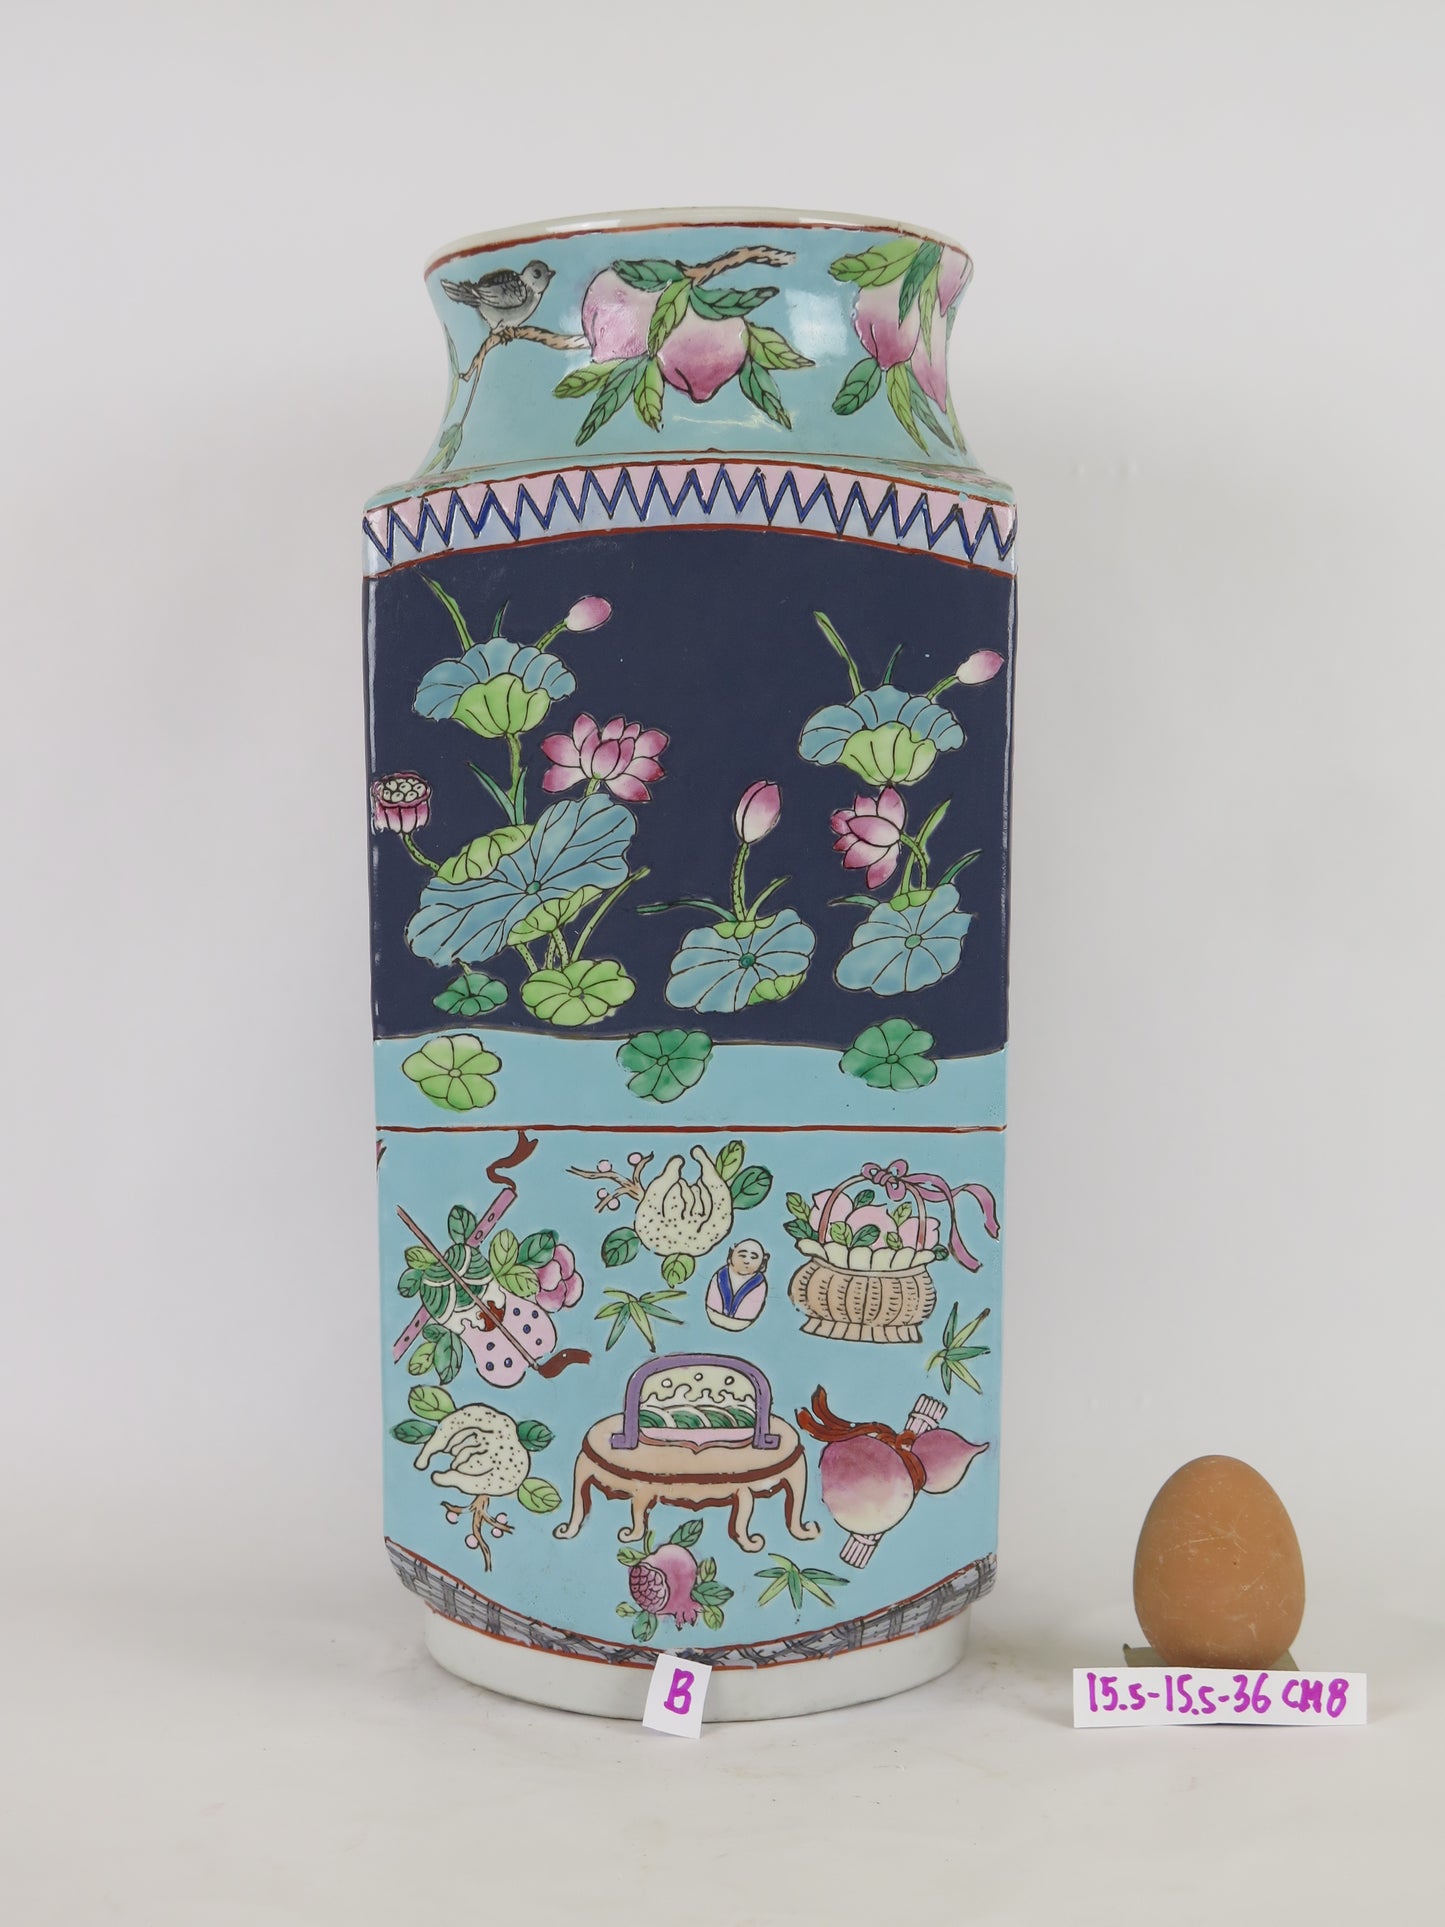 Copy of the vintage Chinese ceramic vase collectible, original high quality China CM8 b